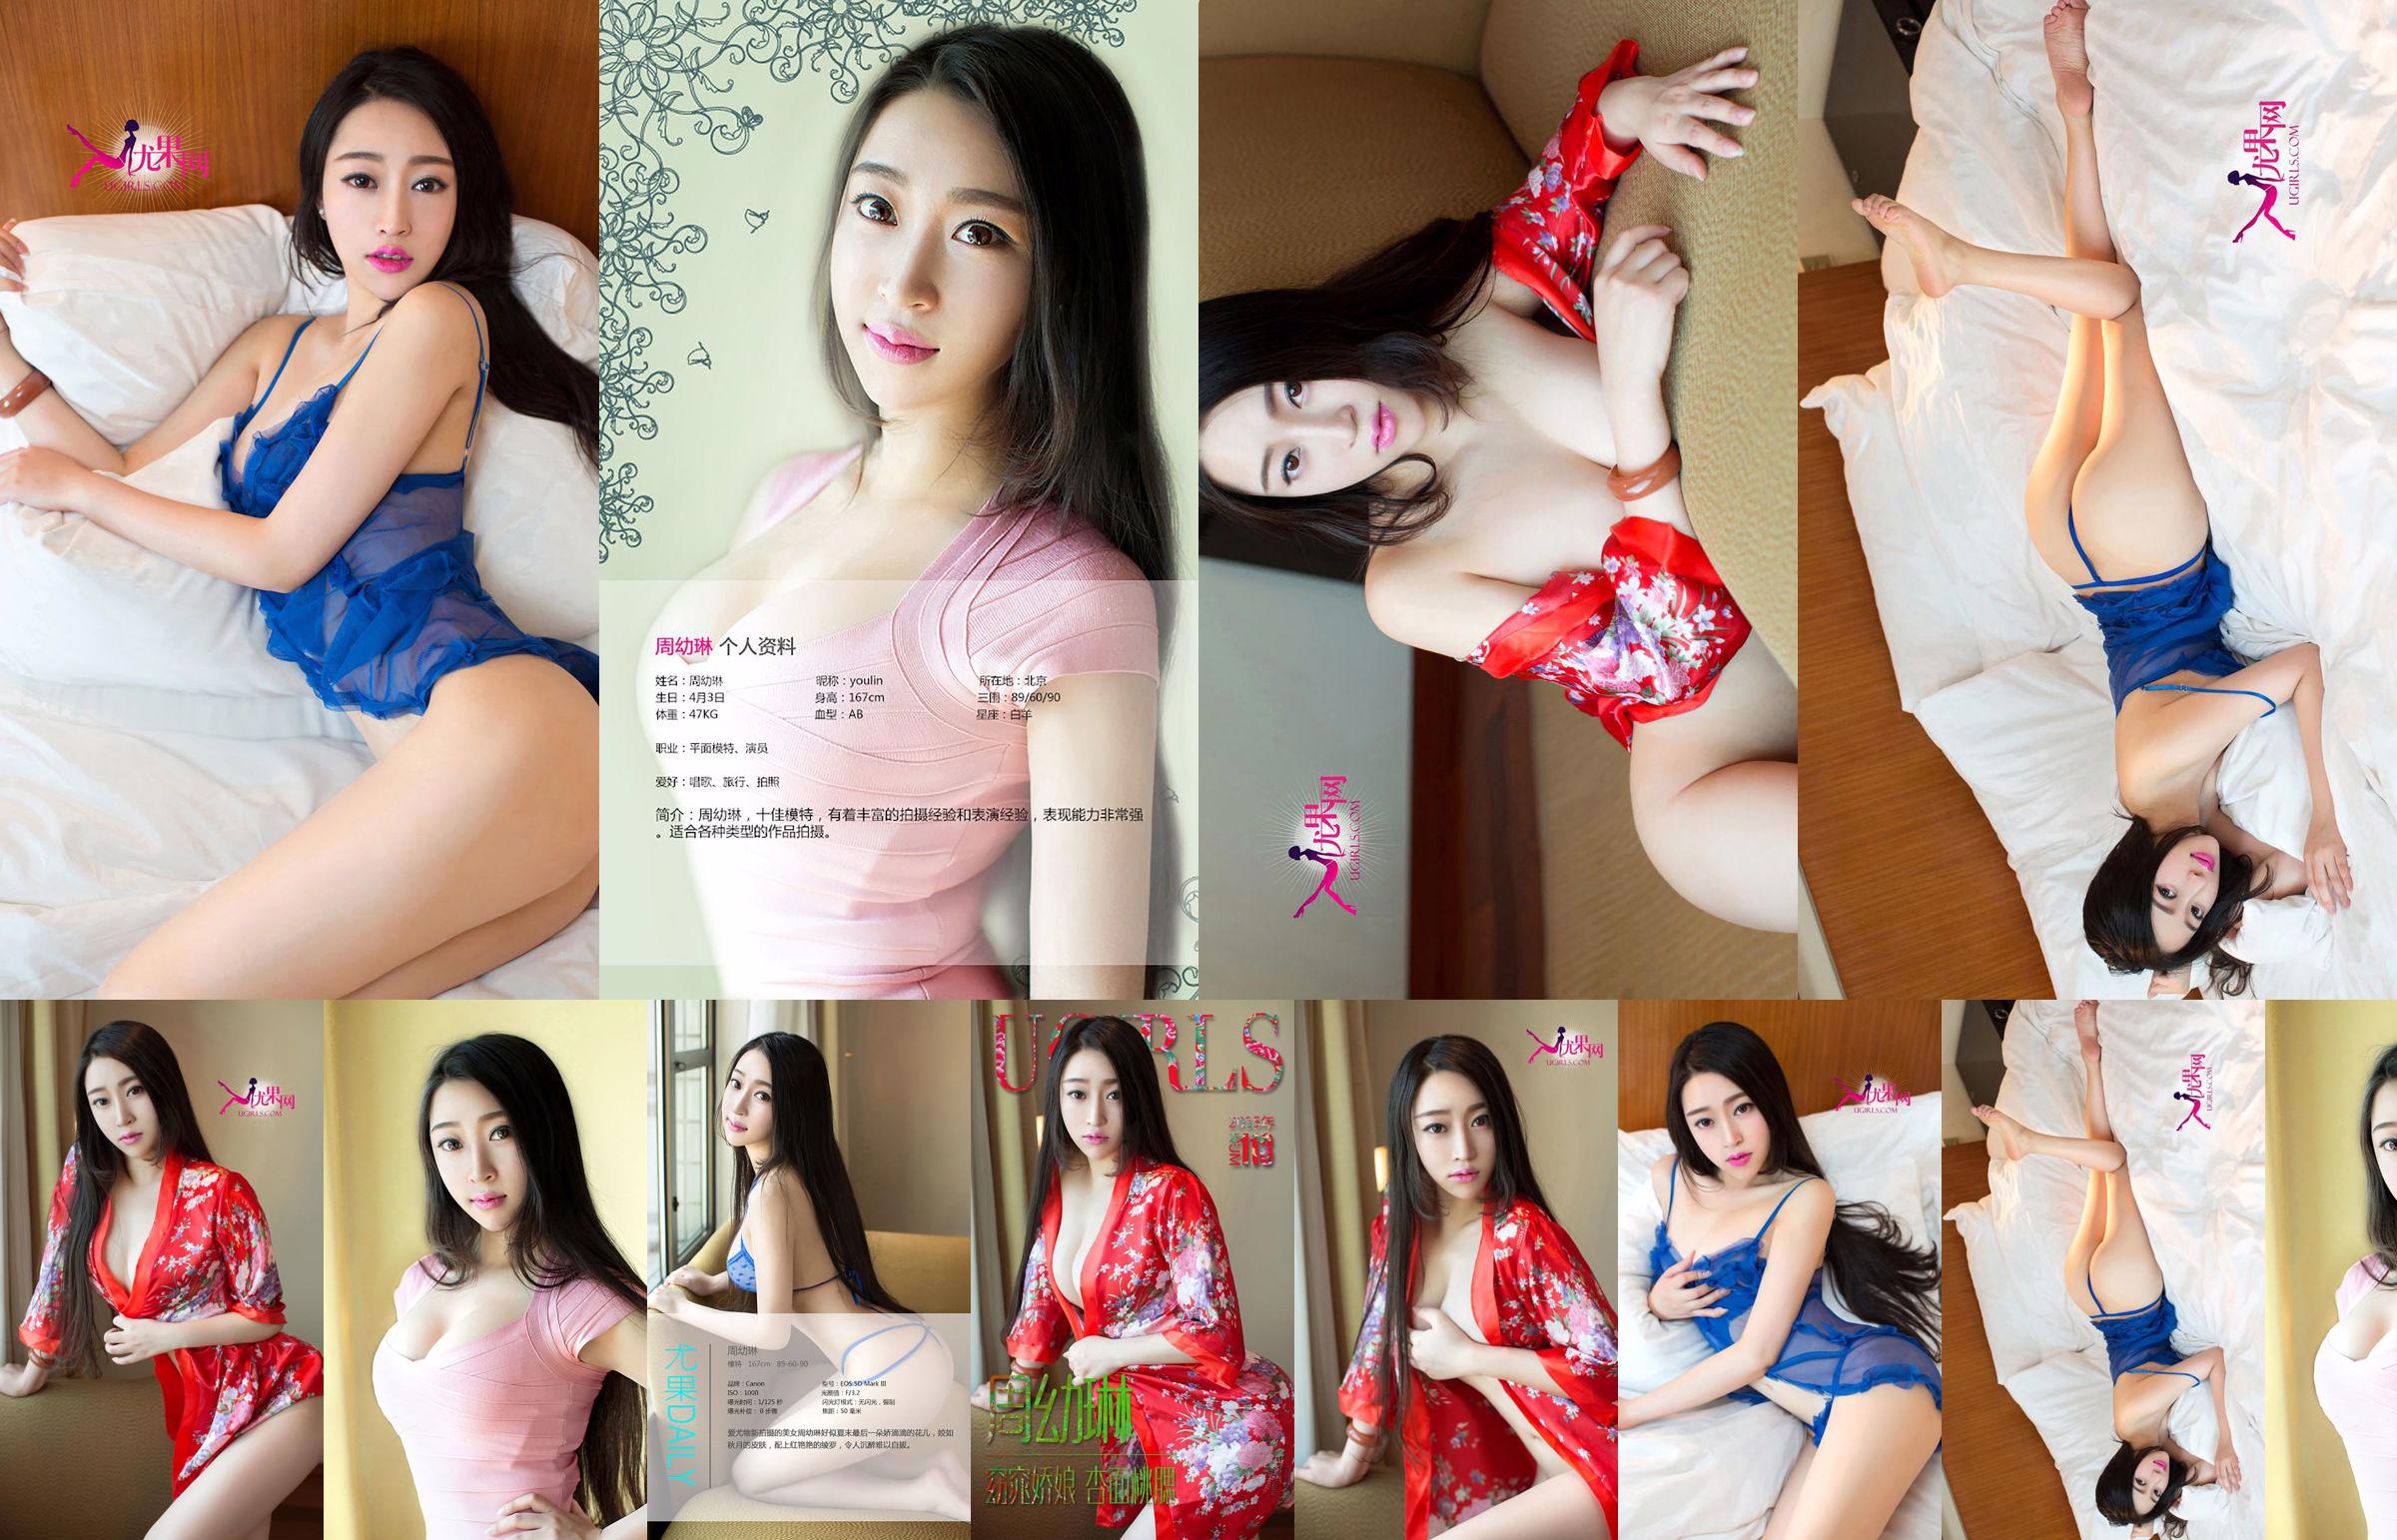 Zhou Youlin "A Beautiful Girl with Apricot Face and Peach Cheeks" [Love Youwu Ugirls] No.113 No.17d8eb Page 1